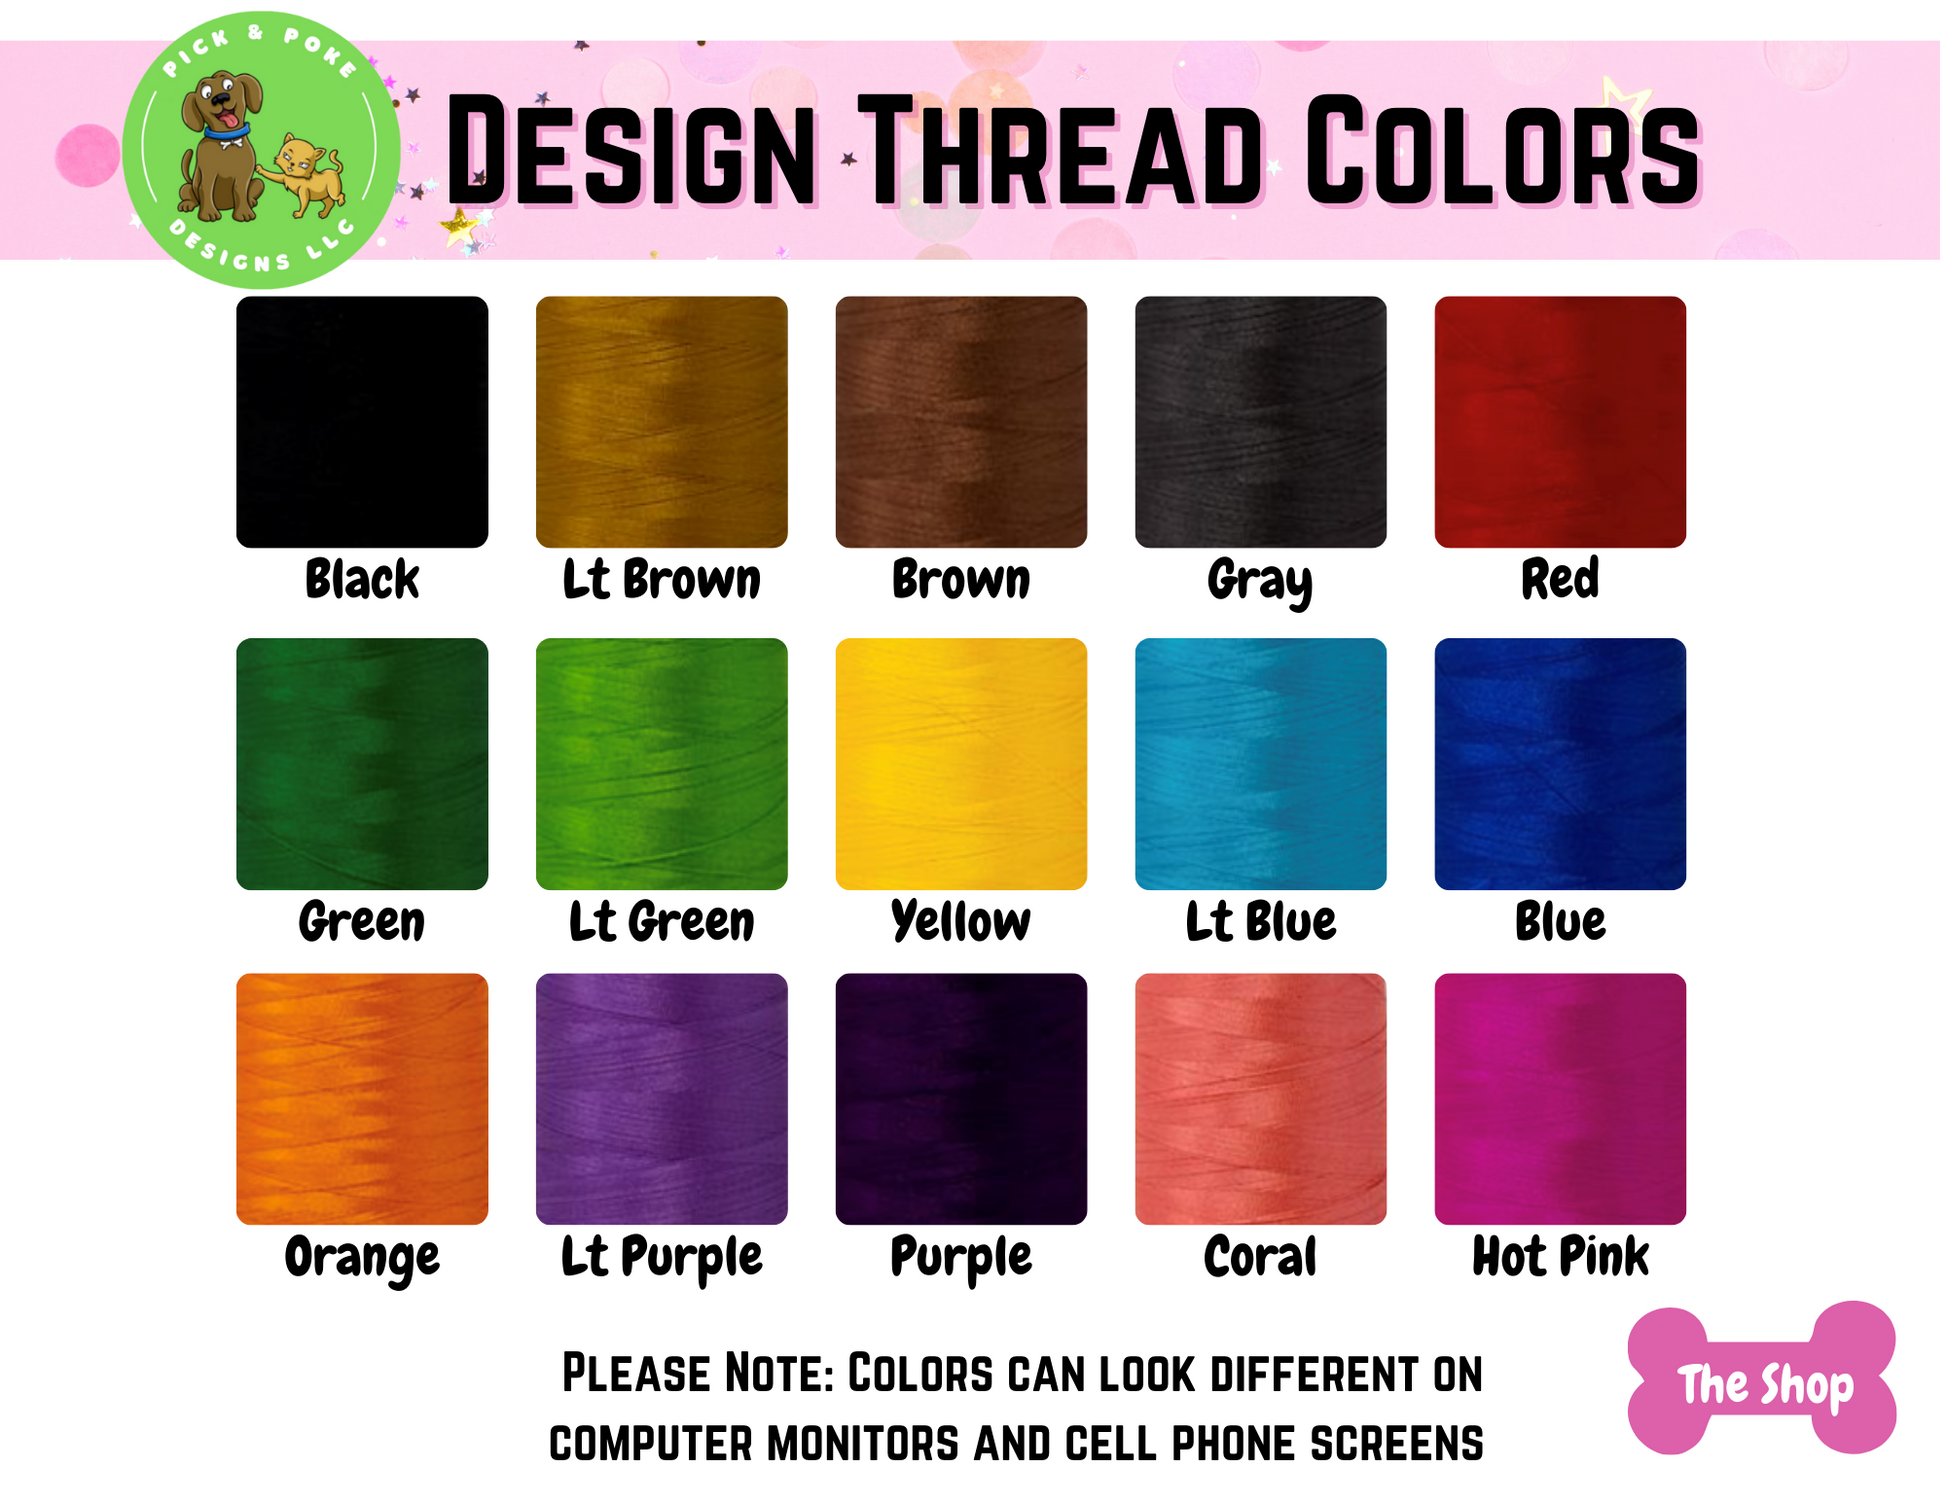 Thread color options for the embroidered design include black, light brown, brown, gray, red, green, light green, yellow, light blue, blue, orange, light purple, purple, coral, and hot pink. 